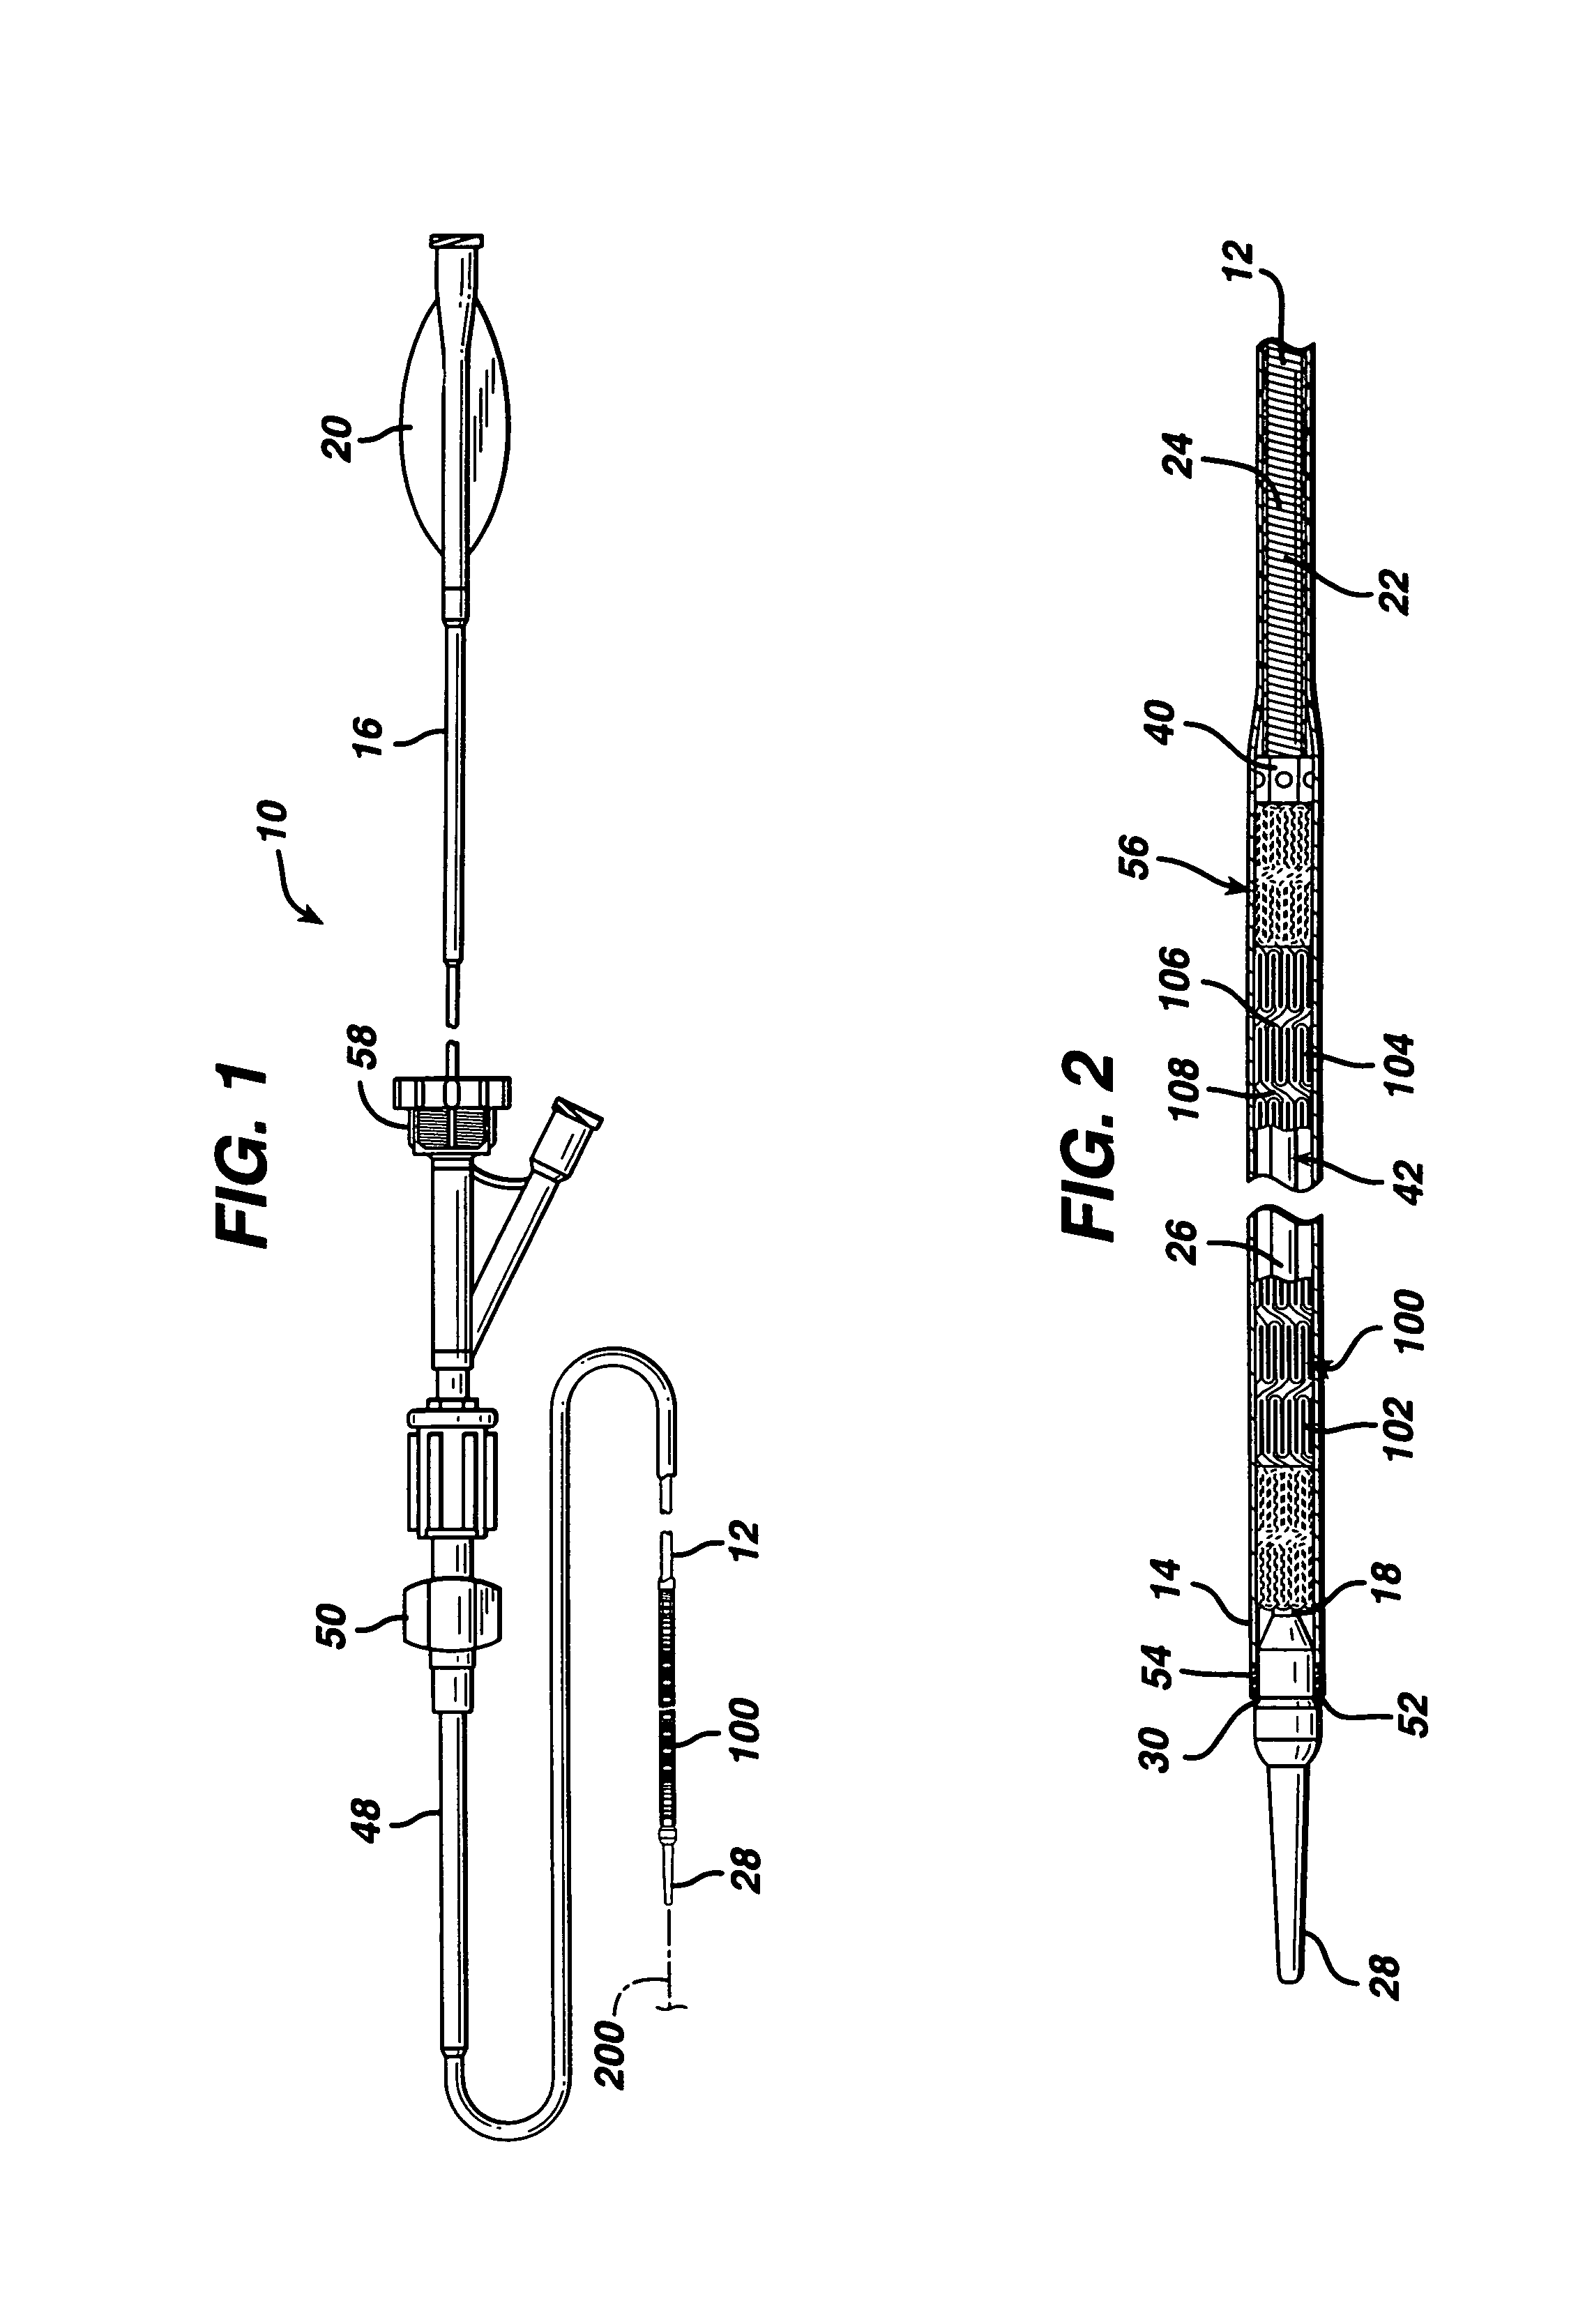 Self-expanding stent delivery system